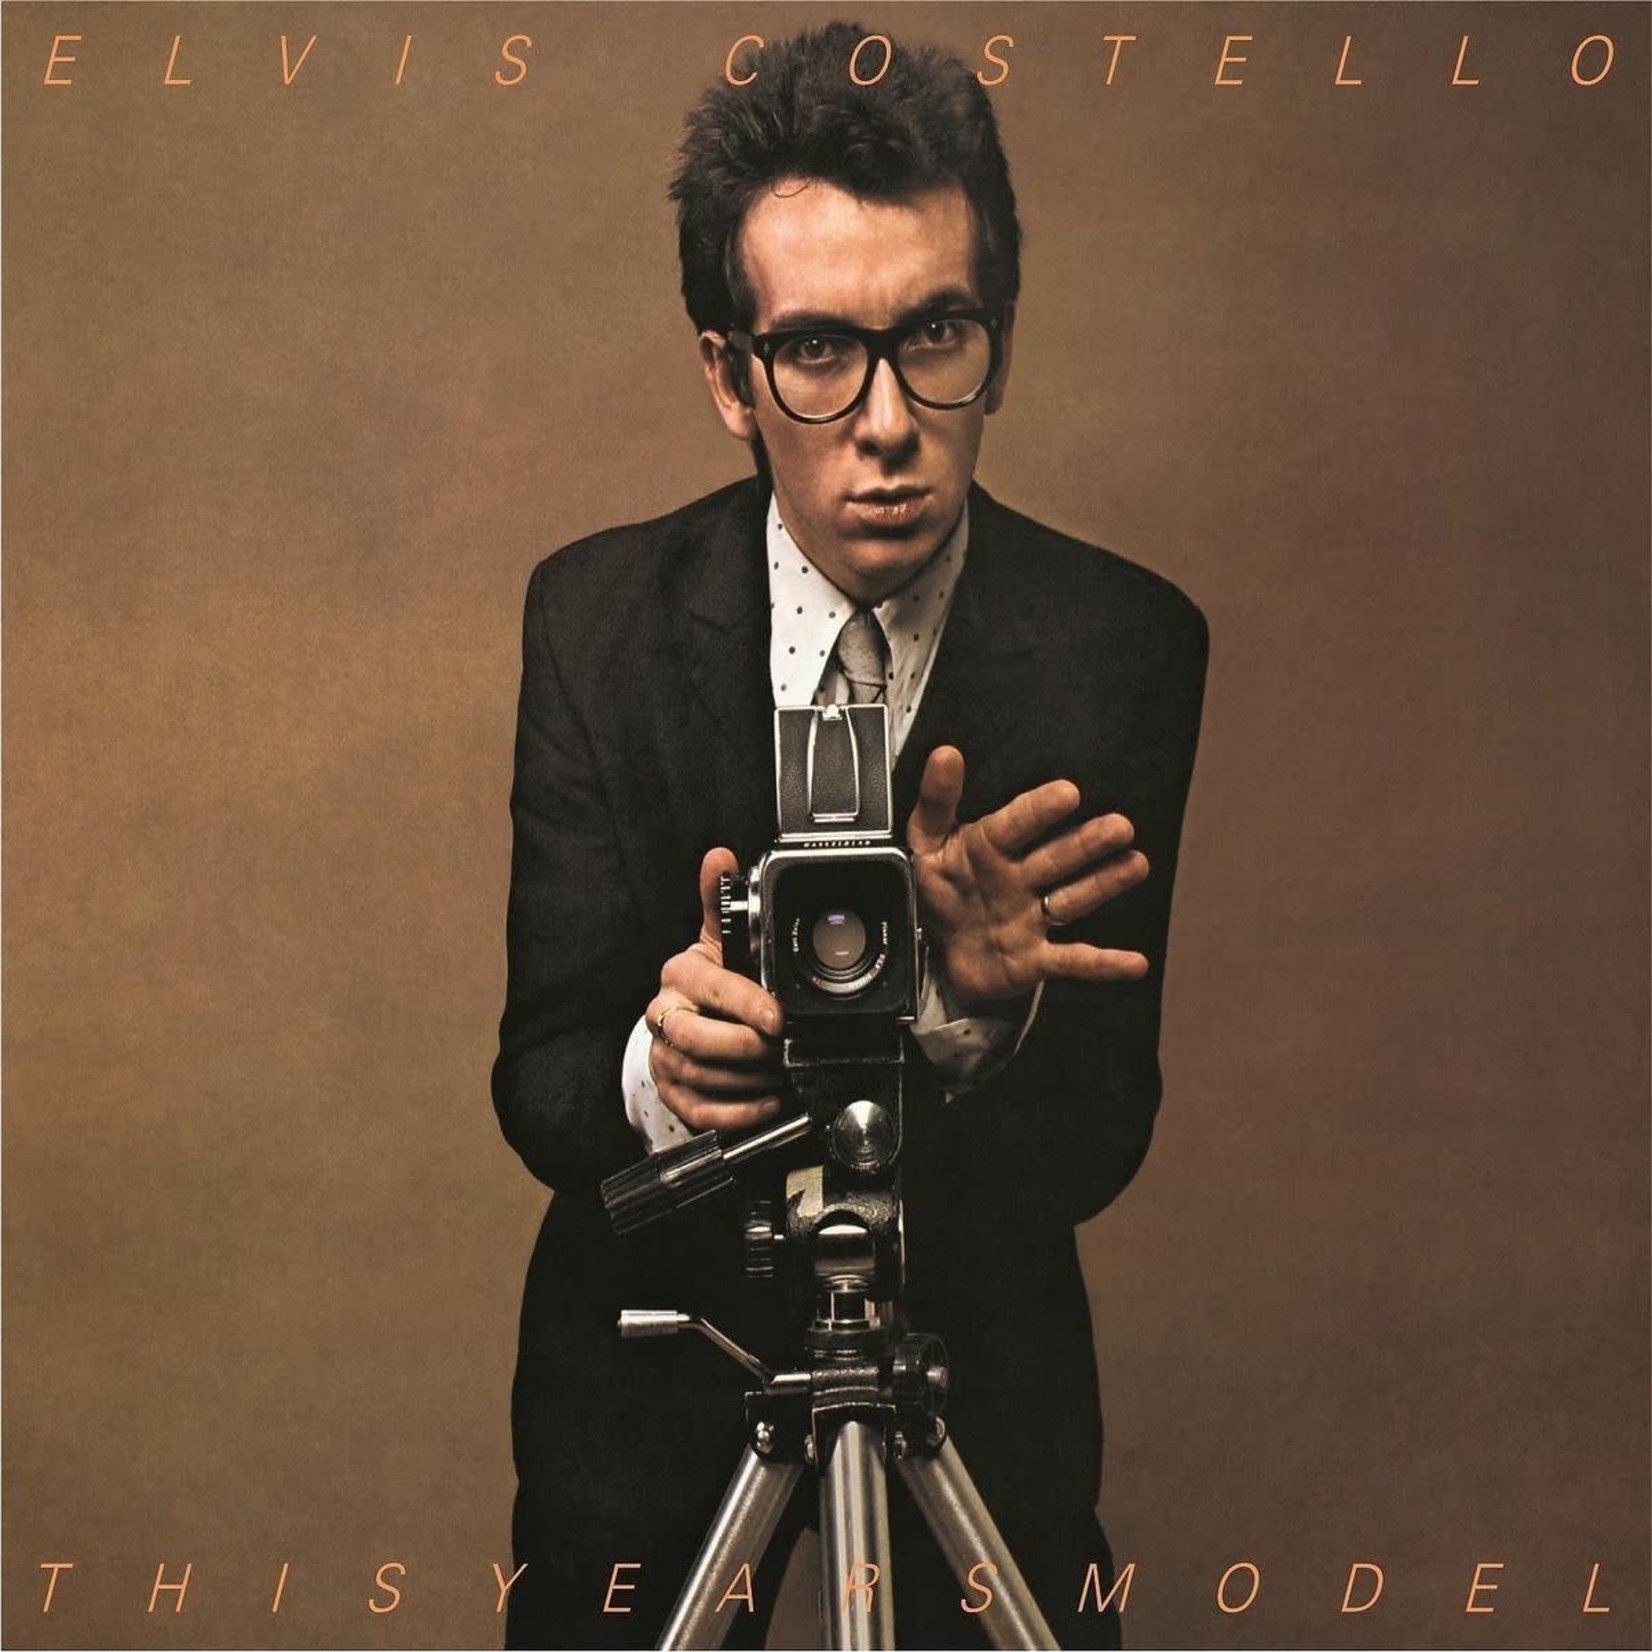 [Vintage] Elvis Costello - This Year's Model